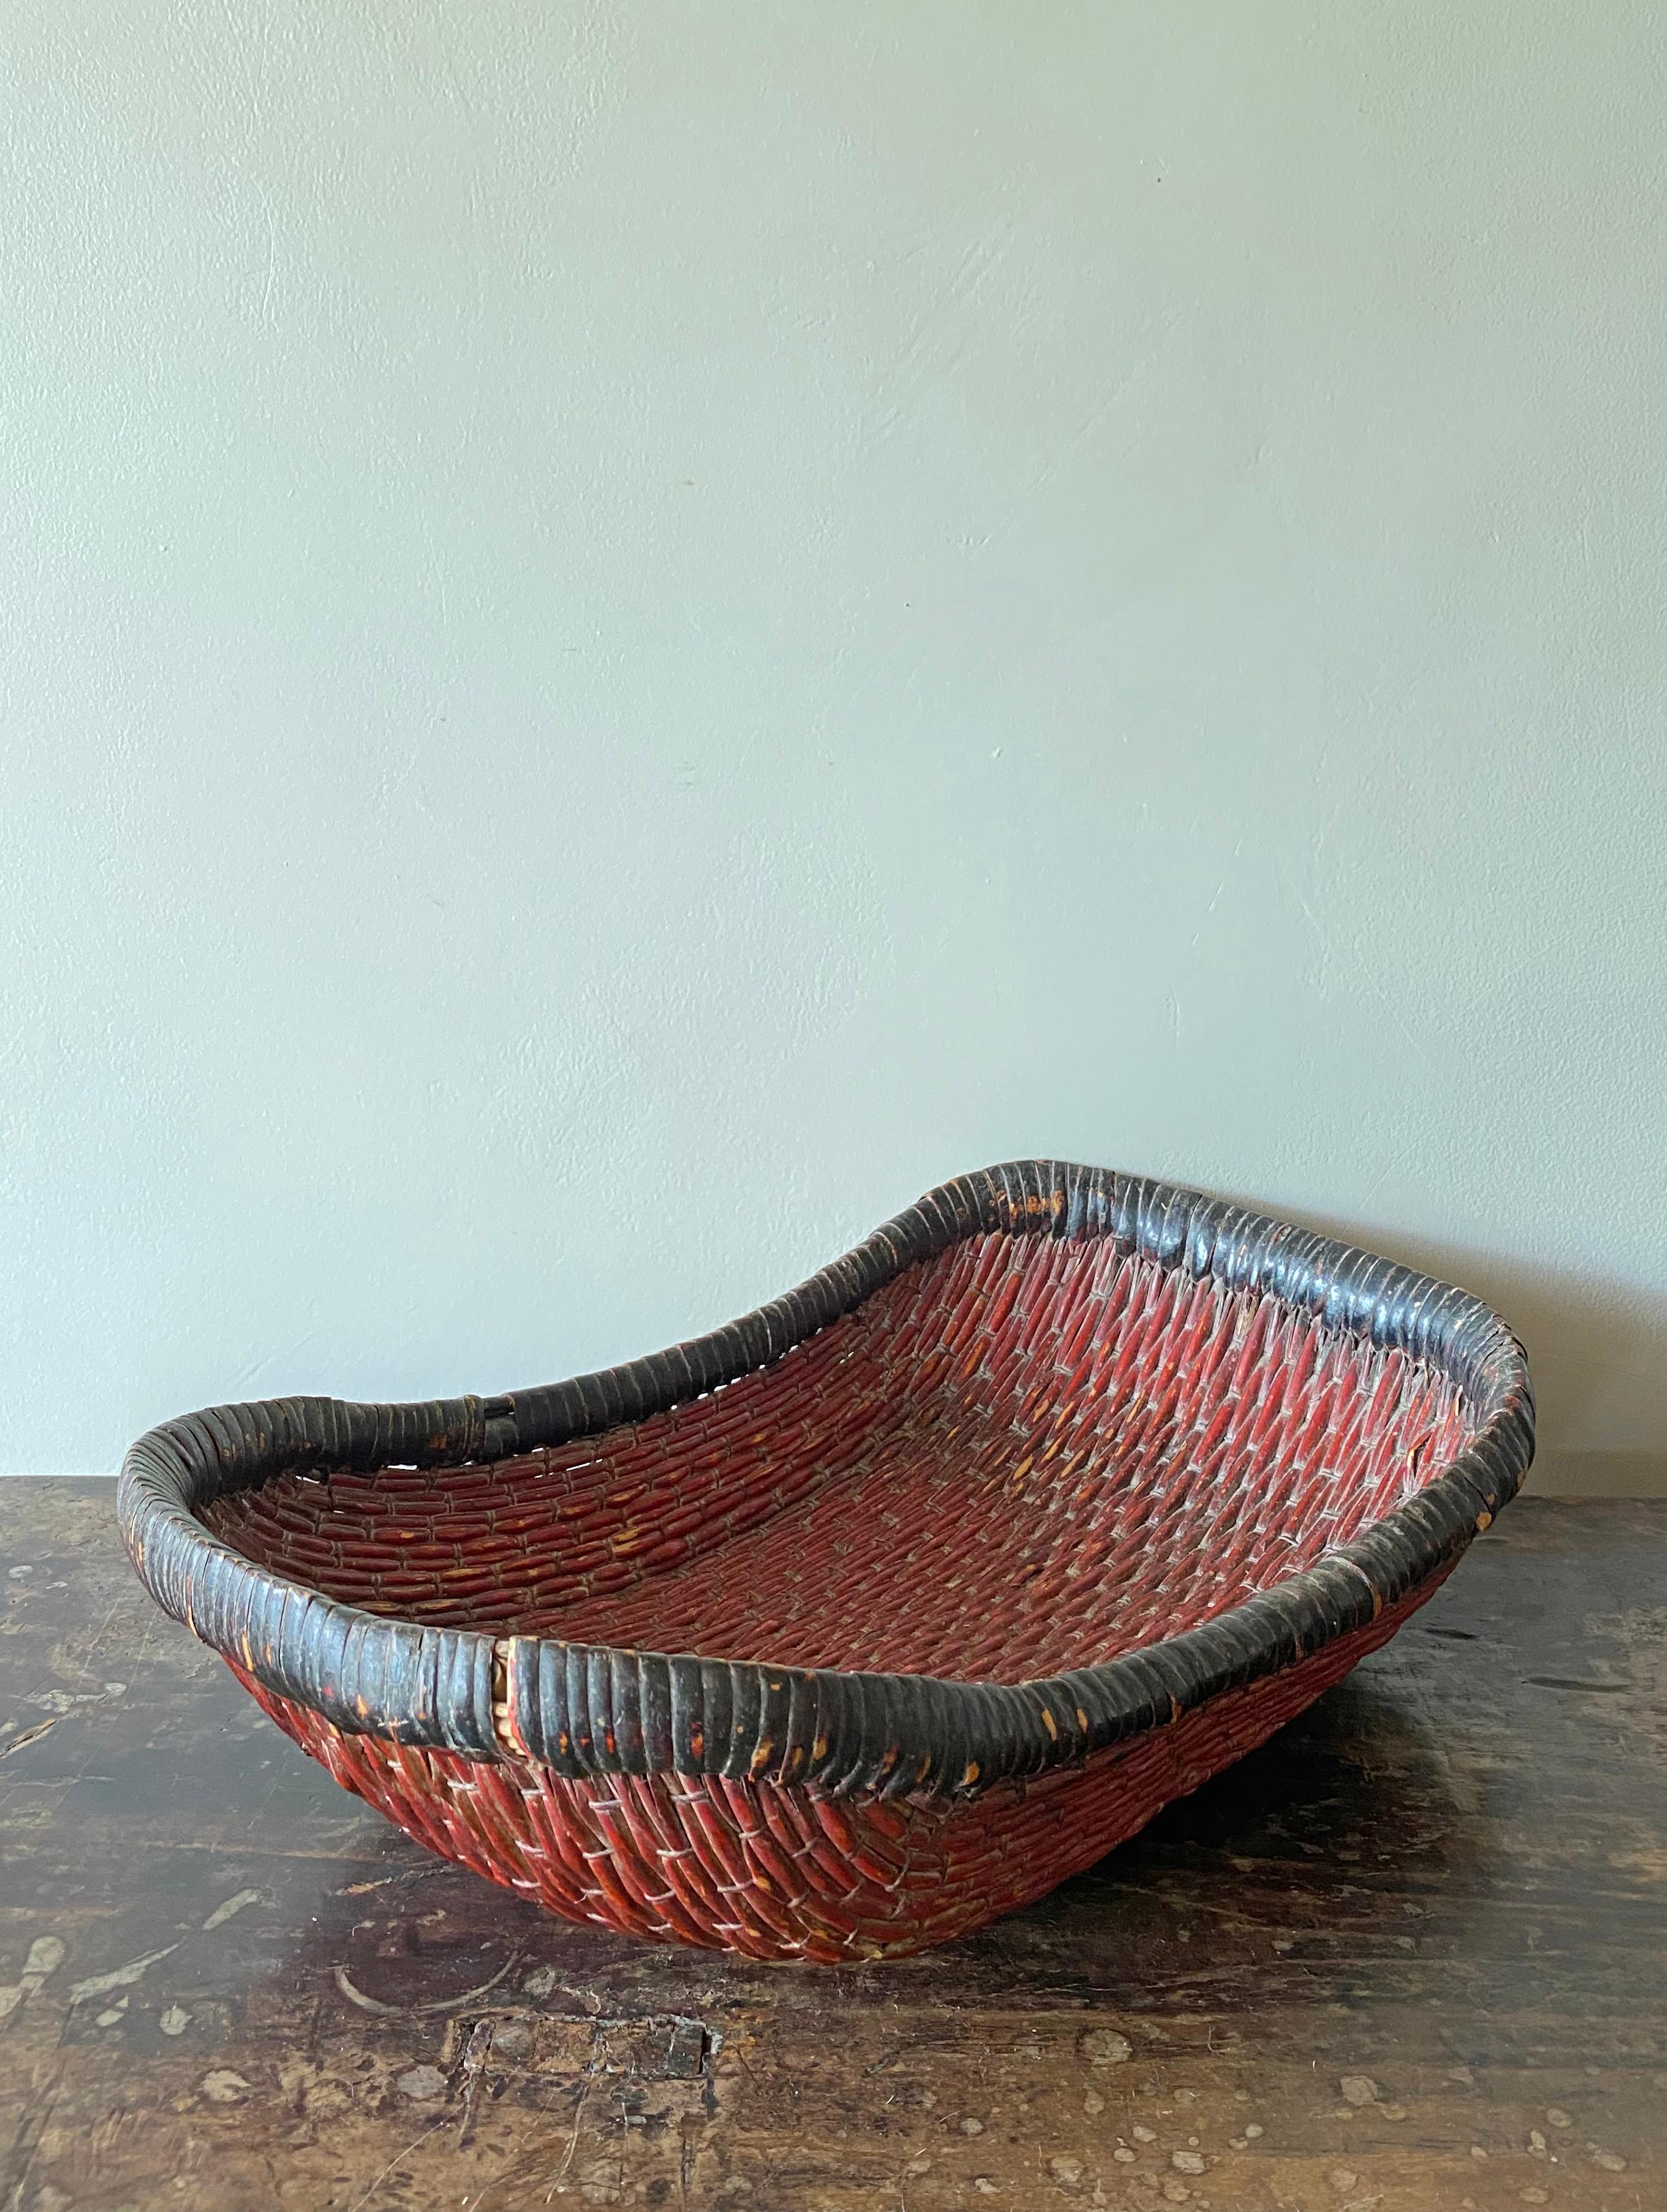 This Chinese reed basket from the early 1900s was crafted using willow reeds that are painted in red and black. Mantou baskets were used to steam Mantou buns, a white and soft steamed Bun typical of Northern China. This tray is perfect to be used as